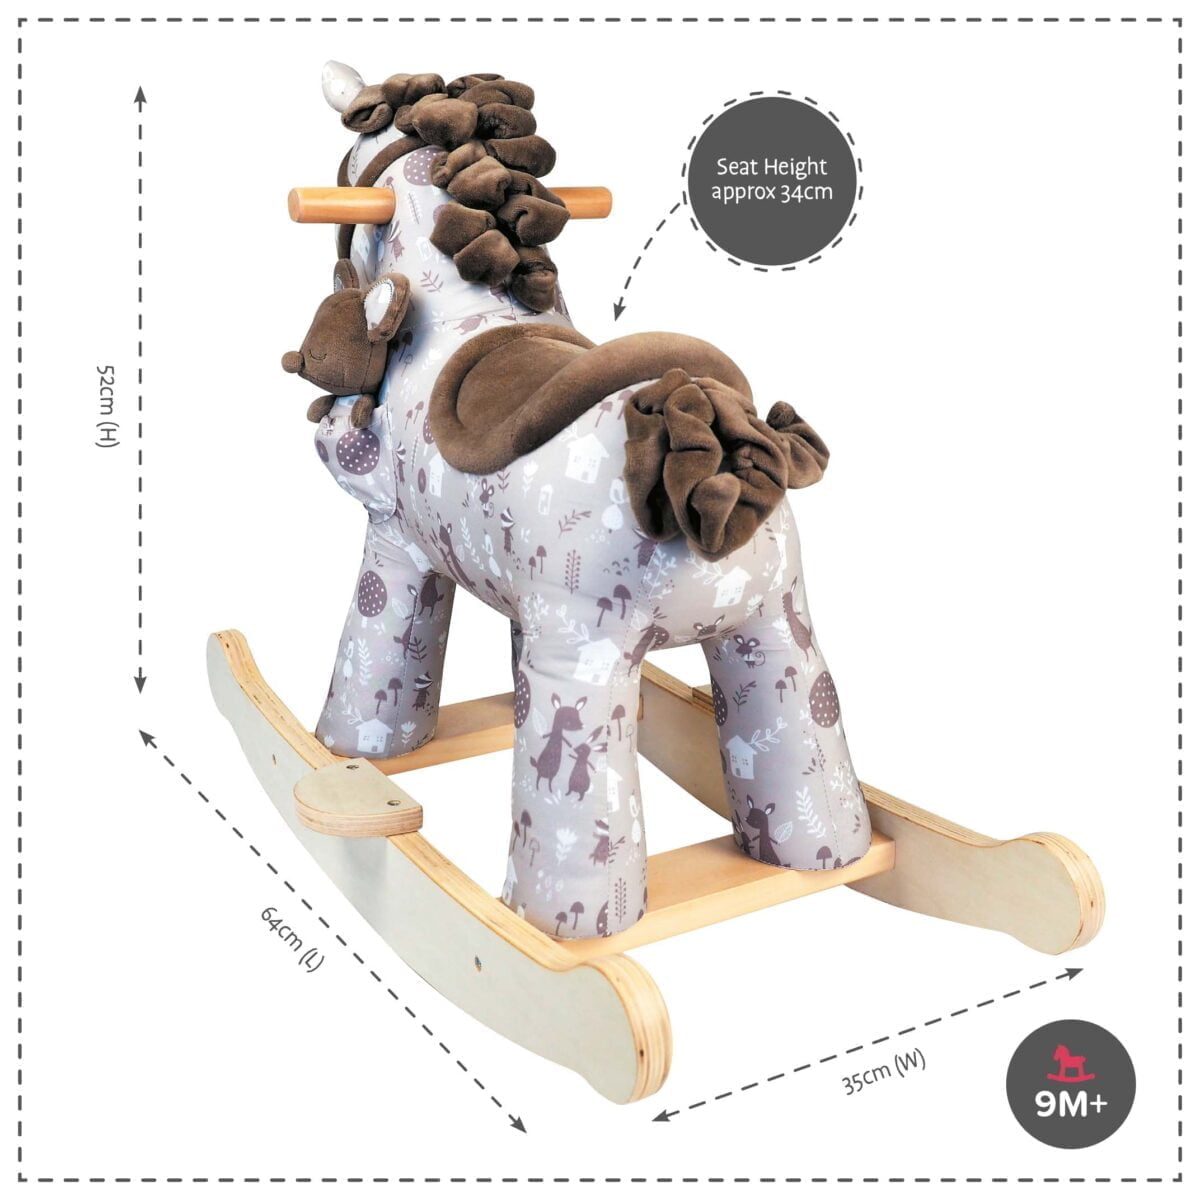 Product dimensions displayed for Biscuit & Skip Rocking Horse 9m+